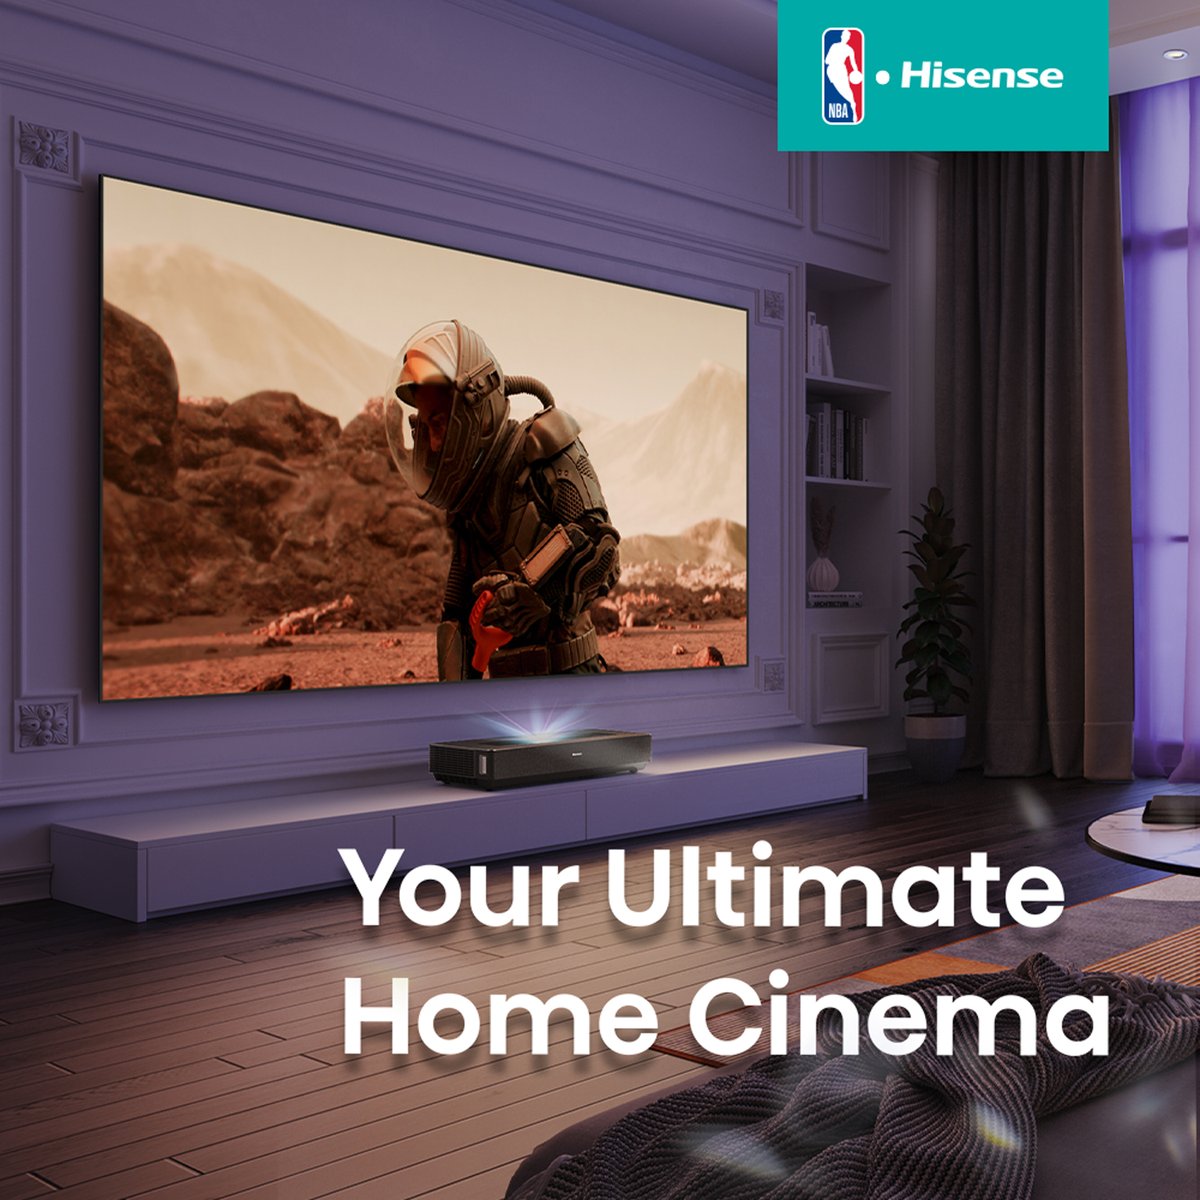 🏠 Transform your living space into a cozy cinematic experience with the #Hisense Laser TV. Experience premium quality visuals that bring your favorite stories to life, right in the comfort of your home.

#HisenseLaserTV #HisenseHome #HomeTheater #Lifestyle